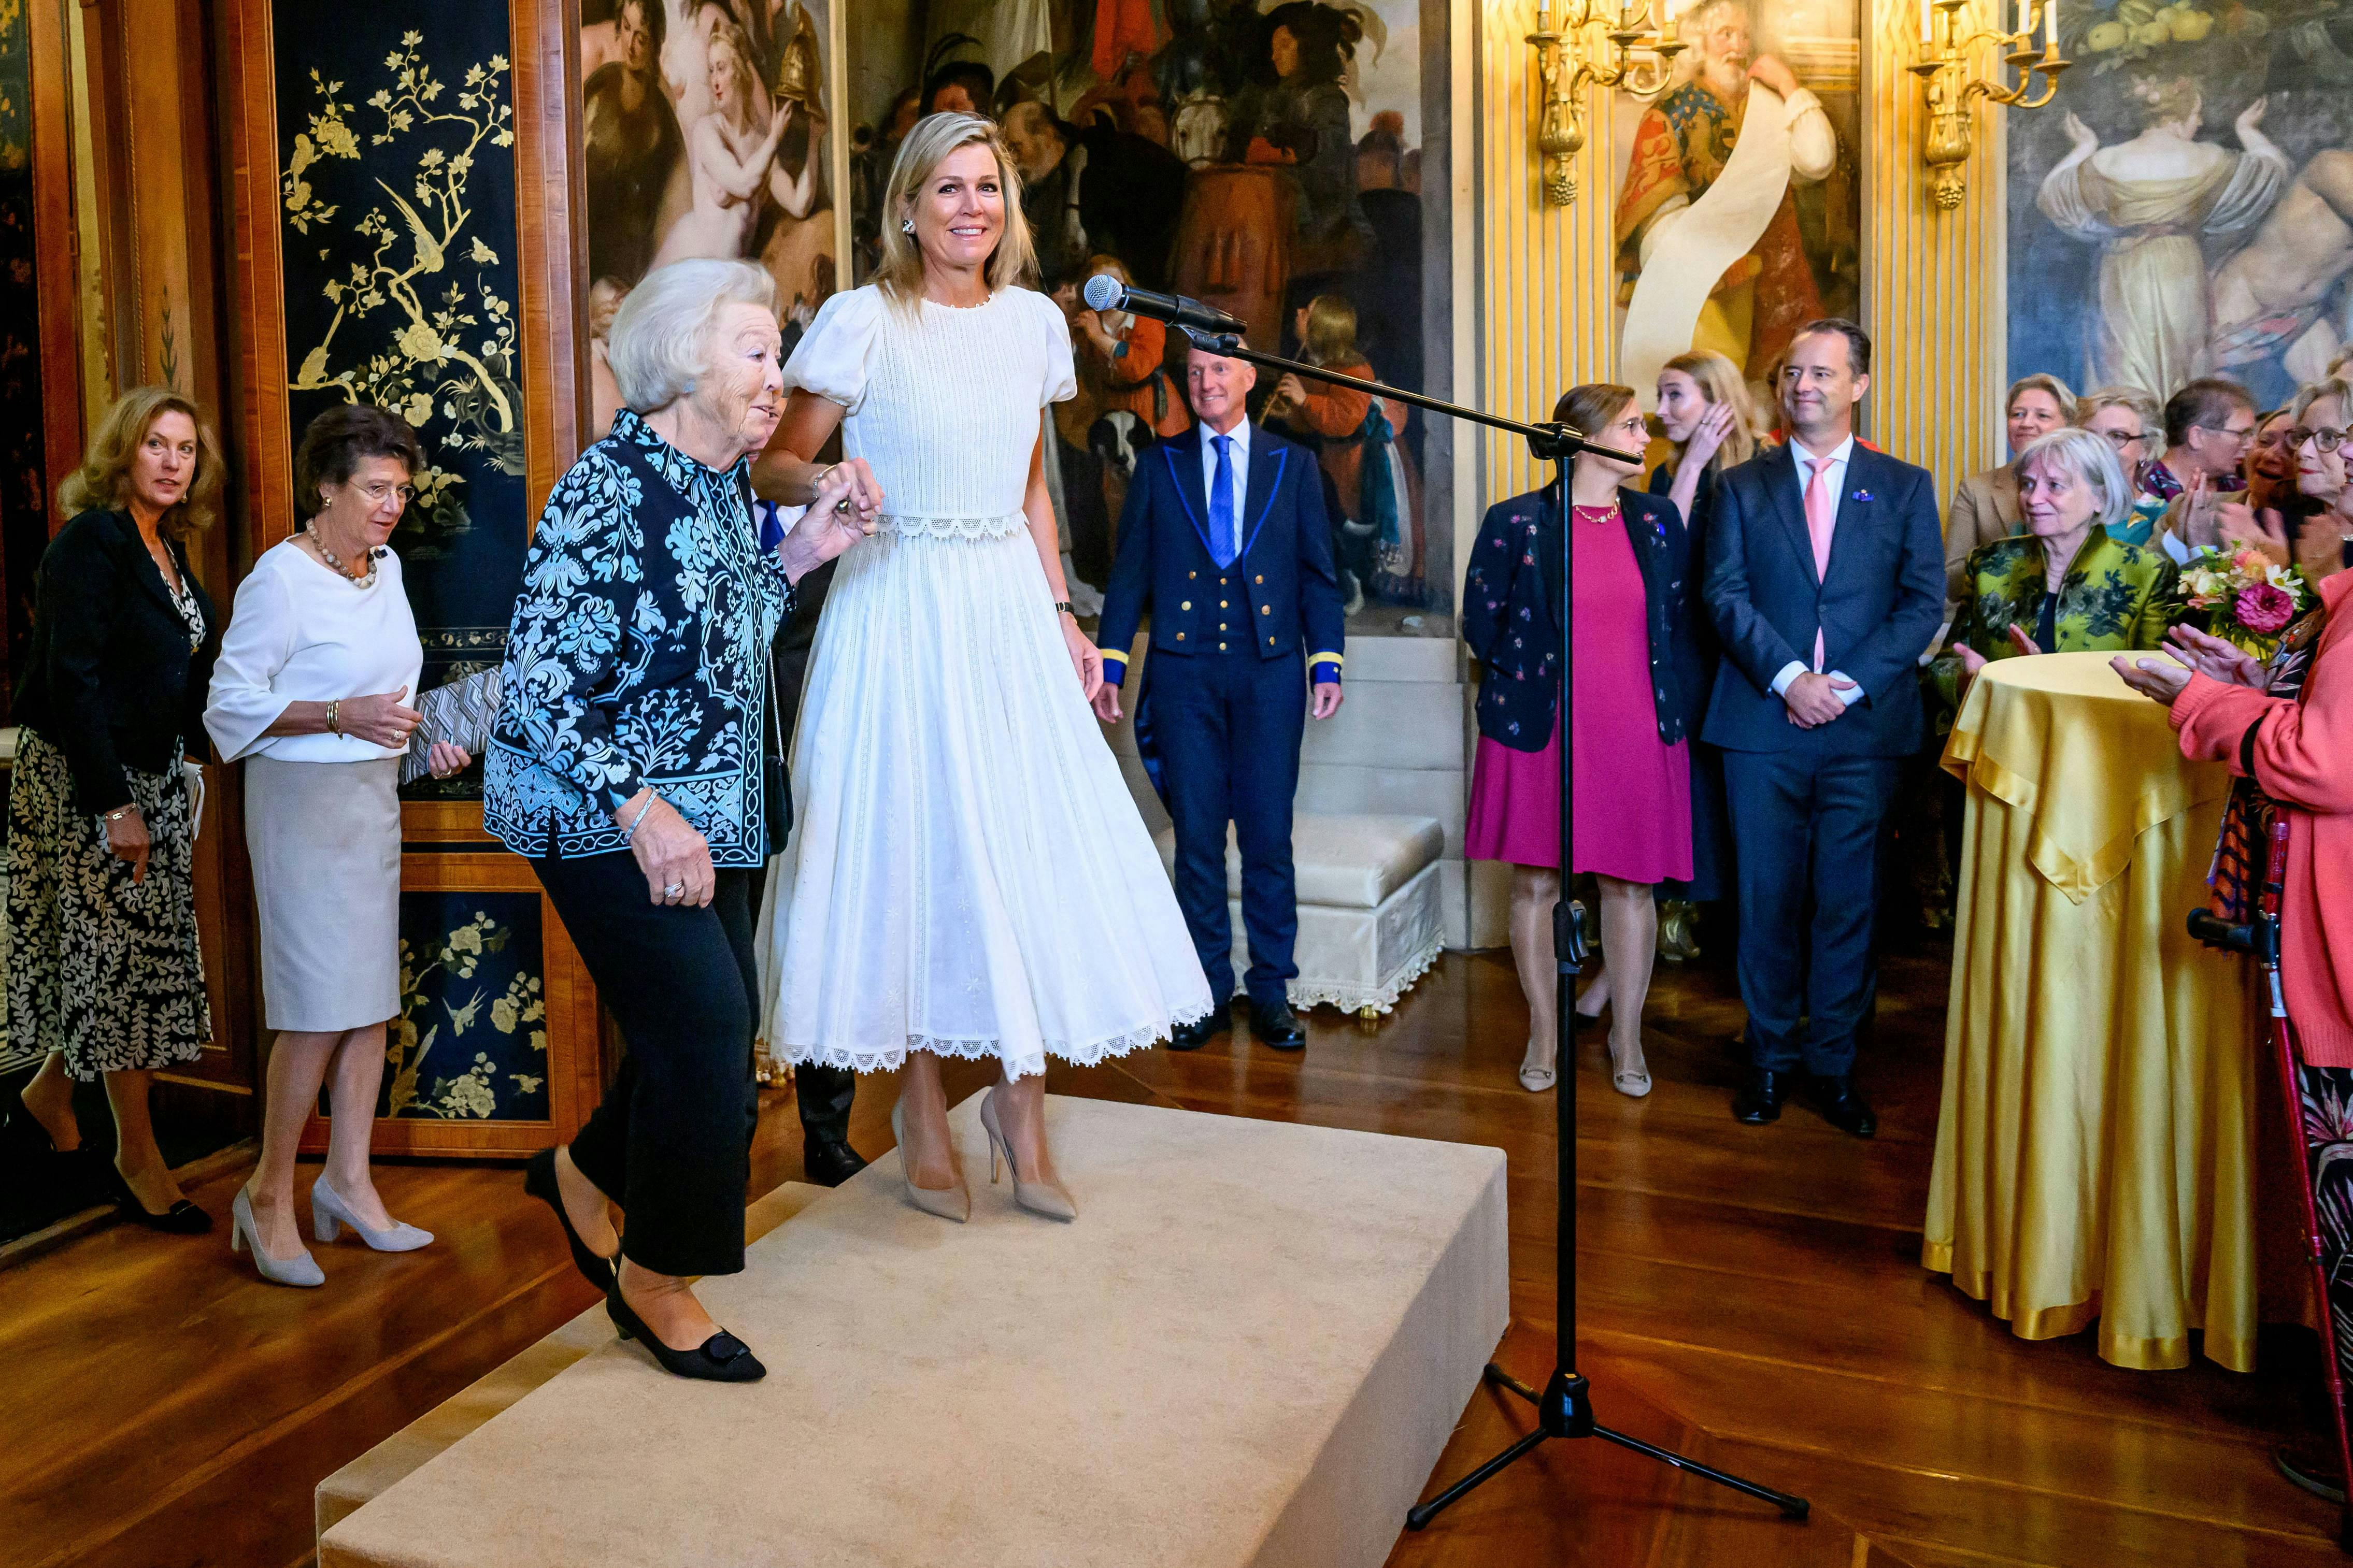 Queen Maxima and Princess Beatrix at the reception for the craftsmen who helped embroider the new curtains for the Chinese Hall in Huis ten Bosch Palace in The Hague. 20 Sep 2023 Pictured: Queen Maxima and Princess Beatrix at the reception for the craftsmen who helped embroider the new curtains for the Chinese Hall in Huis ten Bosch Palace in The Hague. Photo credit: MEGA TheMegaAgency.com +1 888 505 6342 (Mega Agency TagID: MEGA1034419_045.jpg) [Photo via Mega Agency]